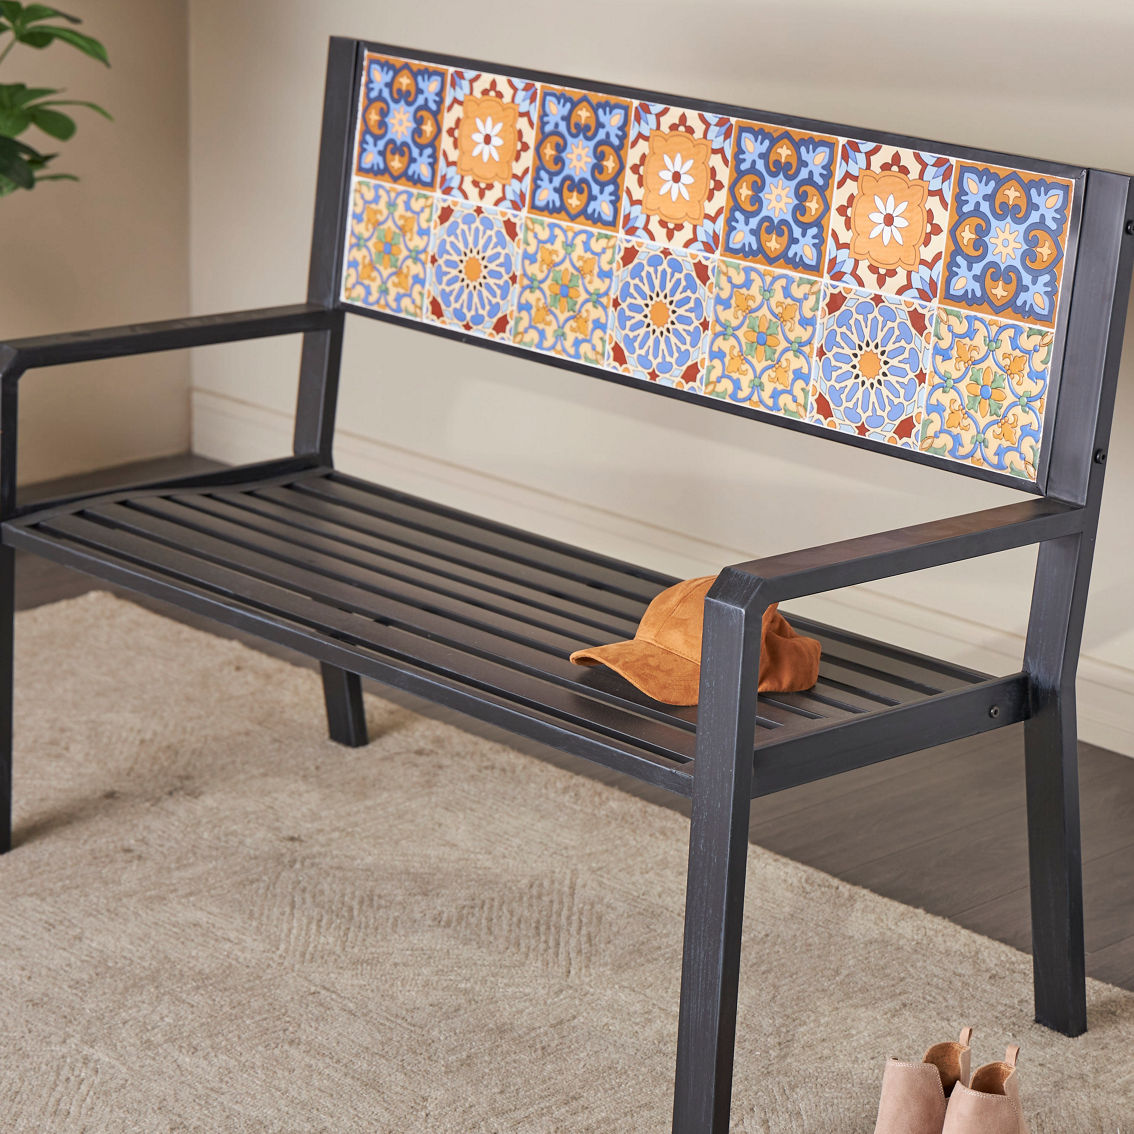 Morgan Hill Home Traditional White Metal Outdoor Bench - Image 2 of 5